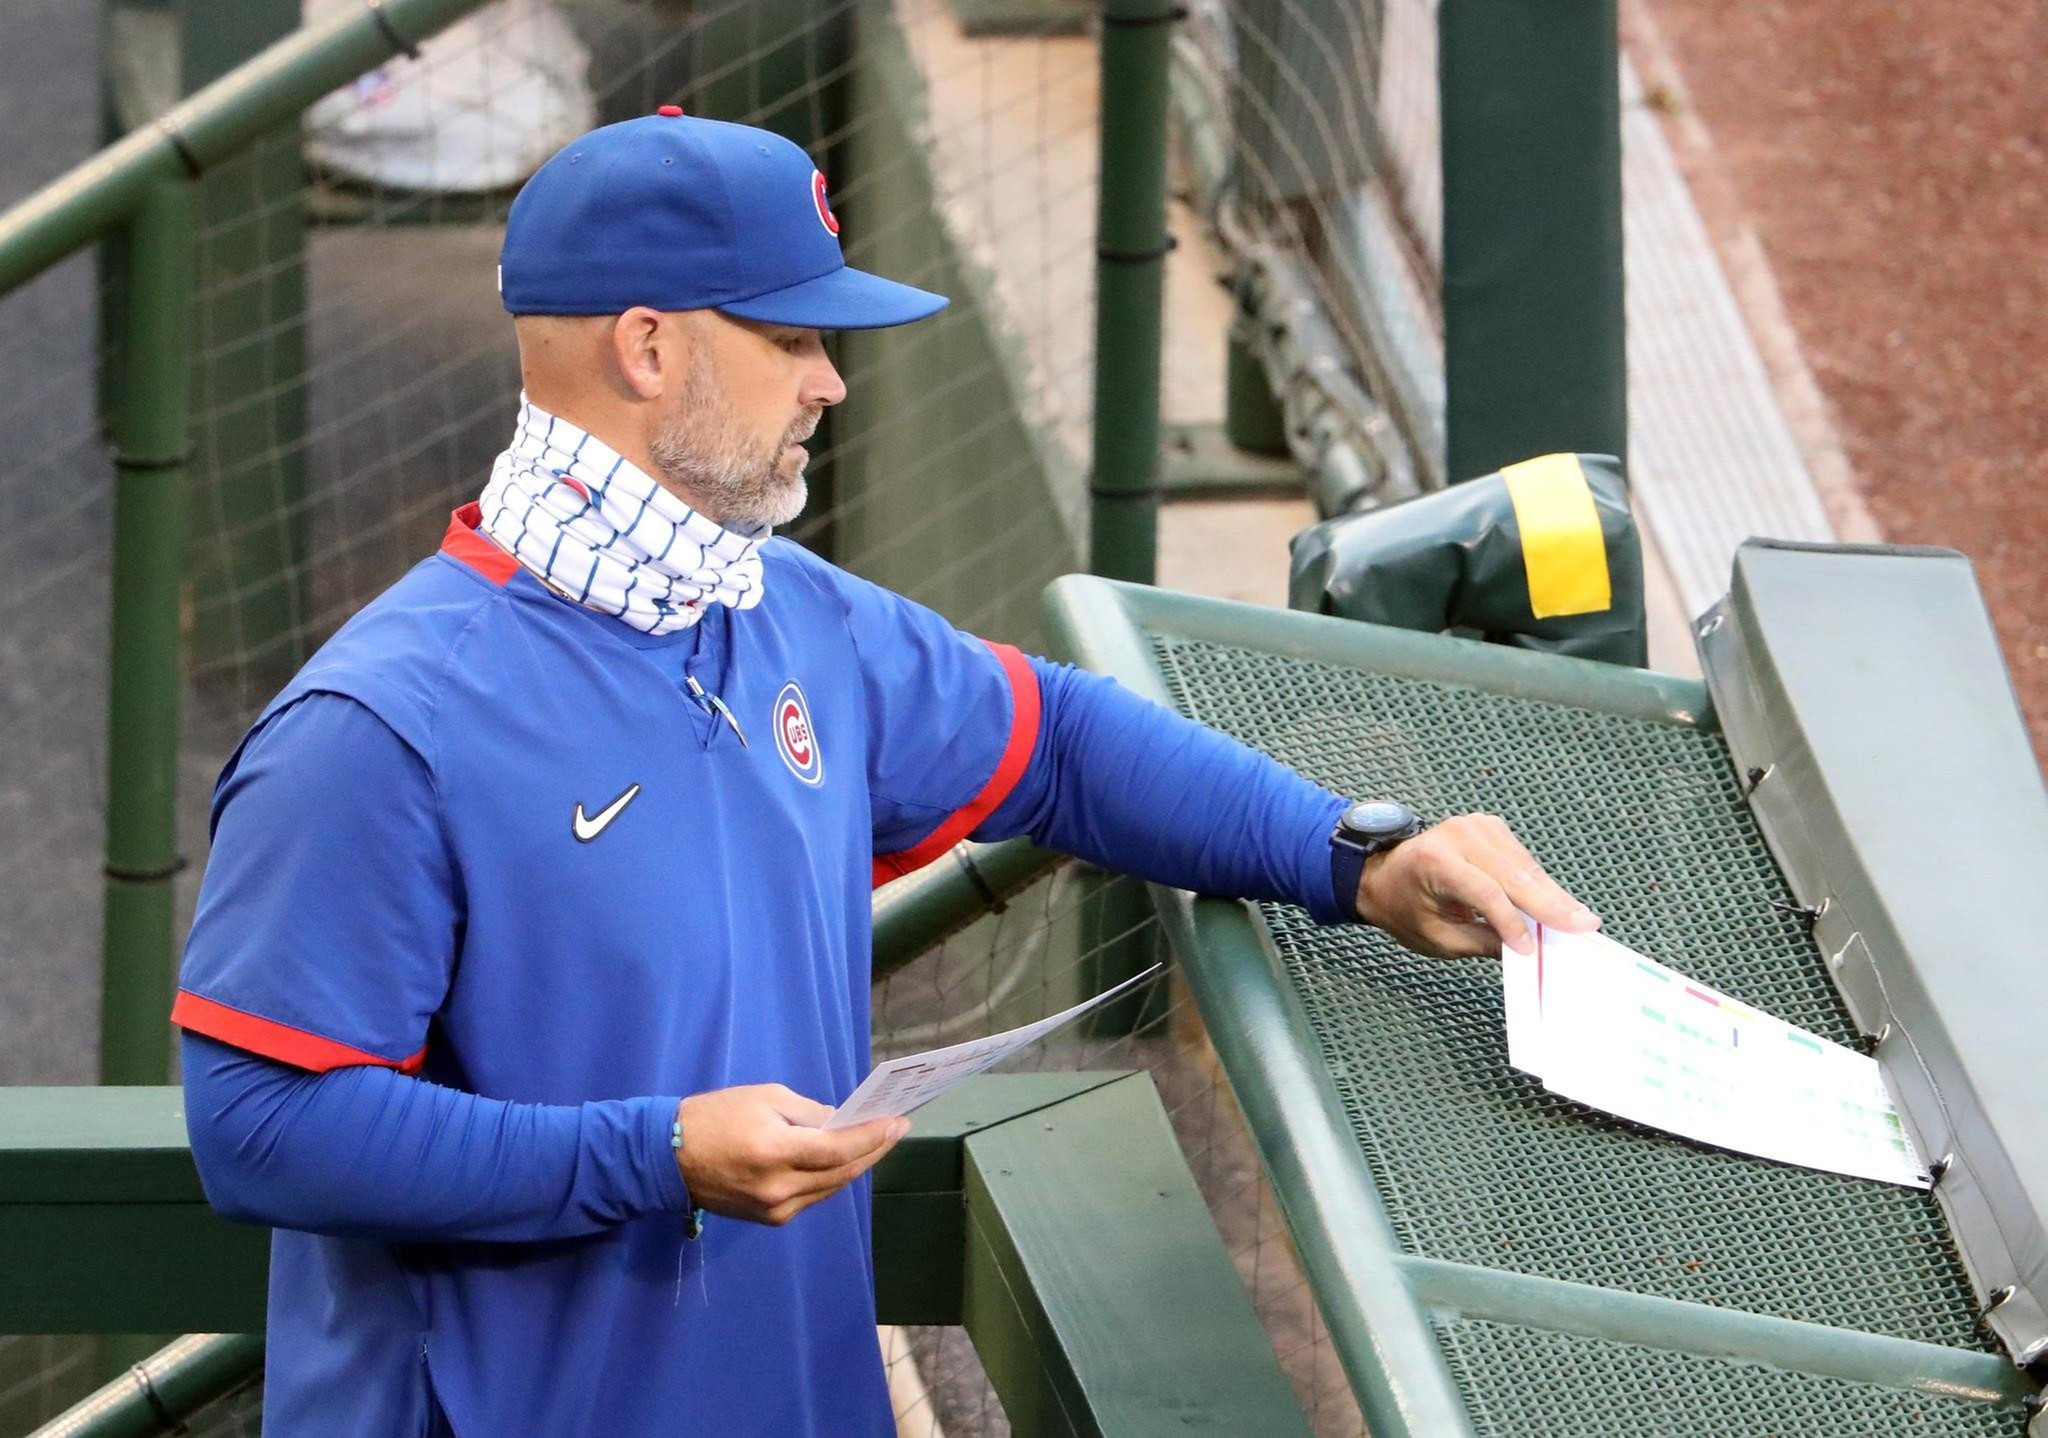 David Ross will be back for Year 5 as Chicago Cubs manager